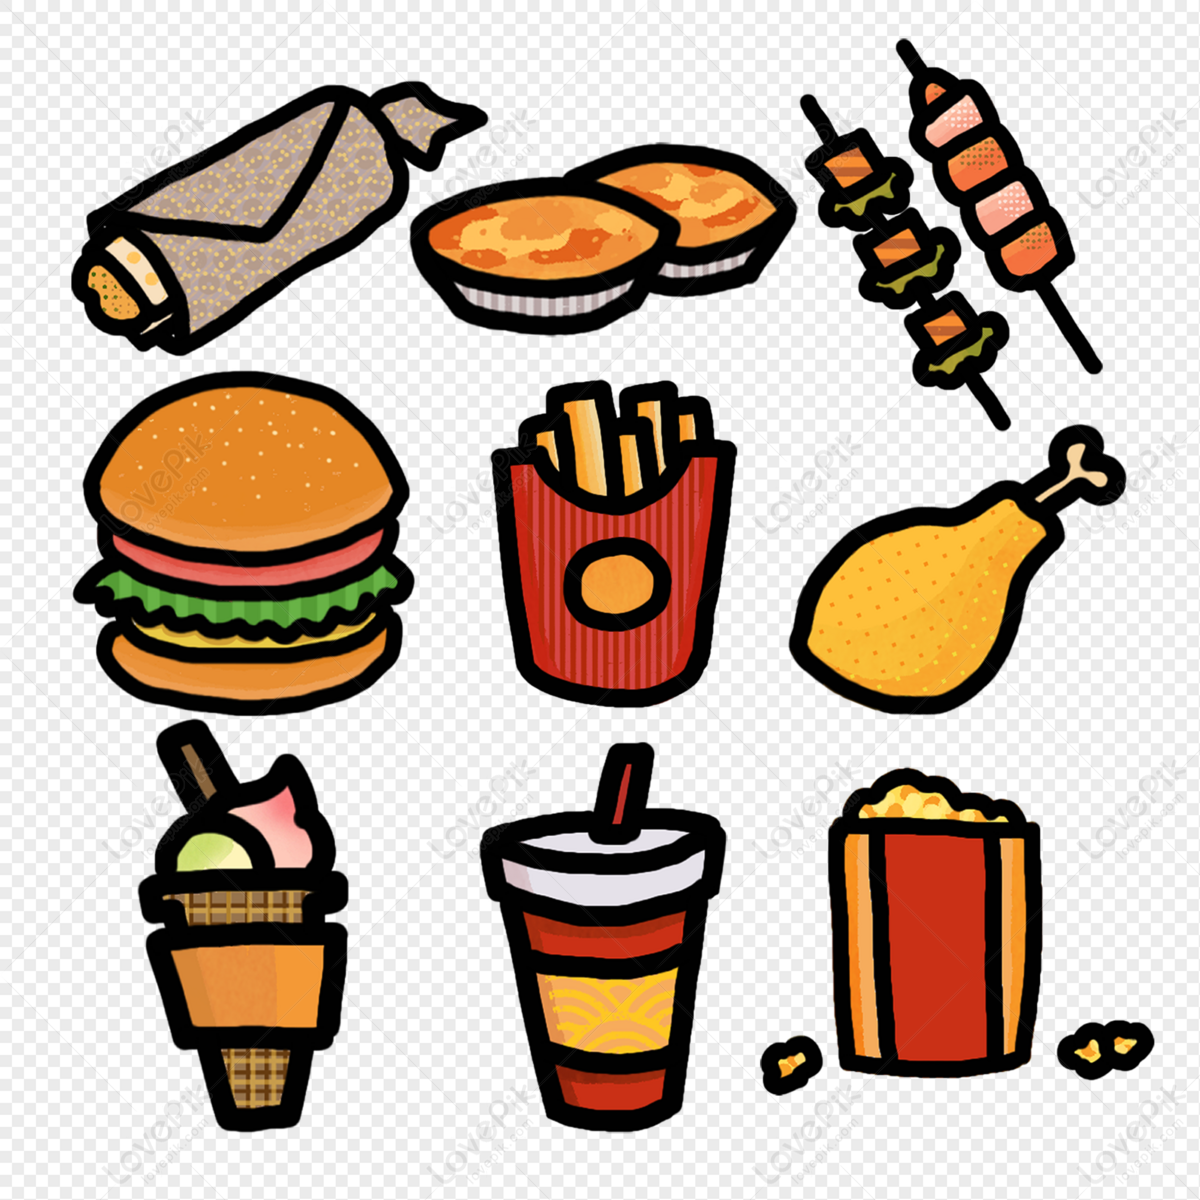 Junk Food Clipart PNG Images With Transparent Background | Free ...